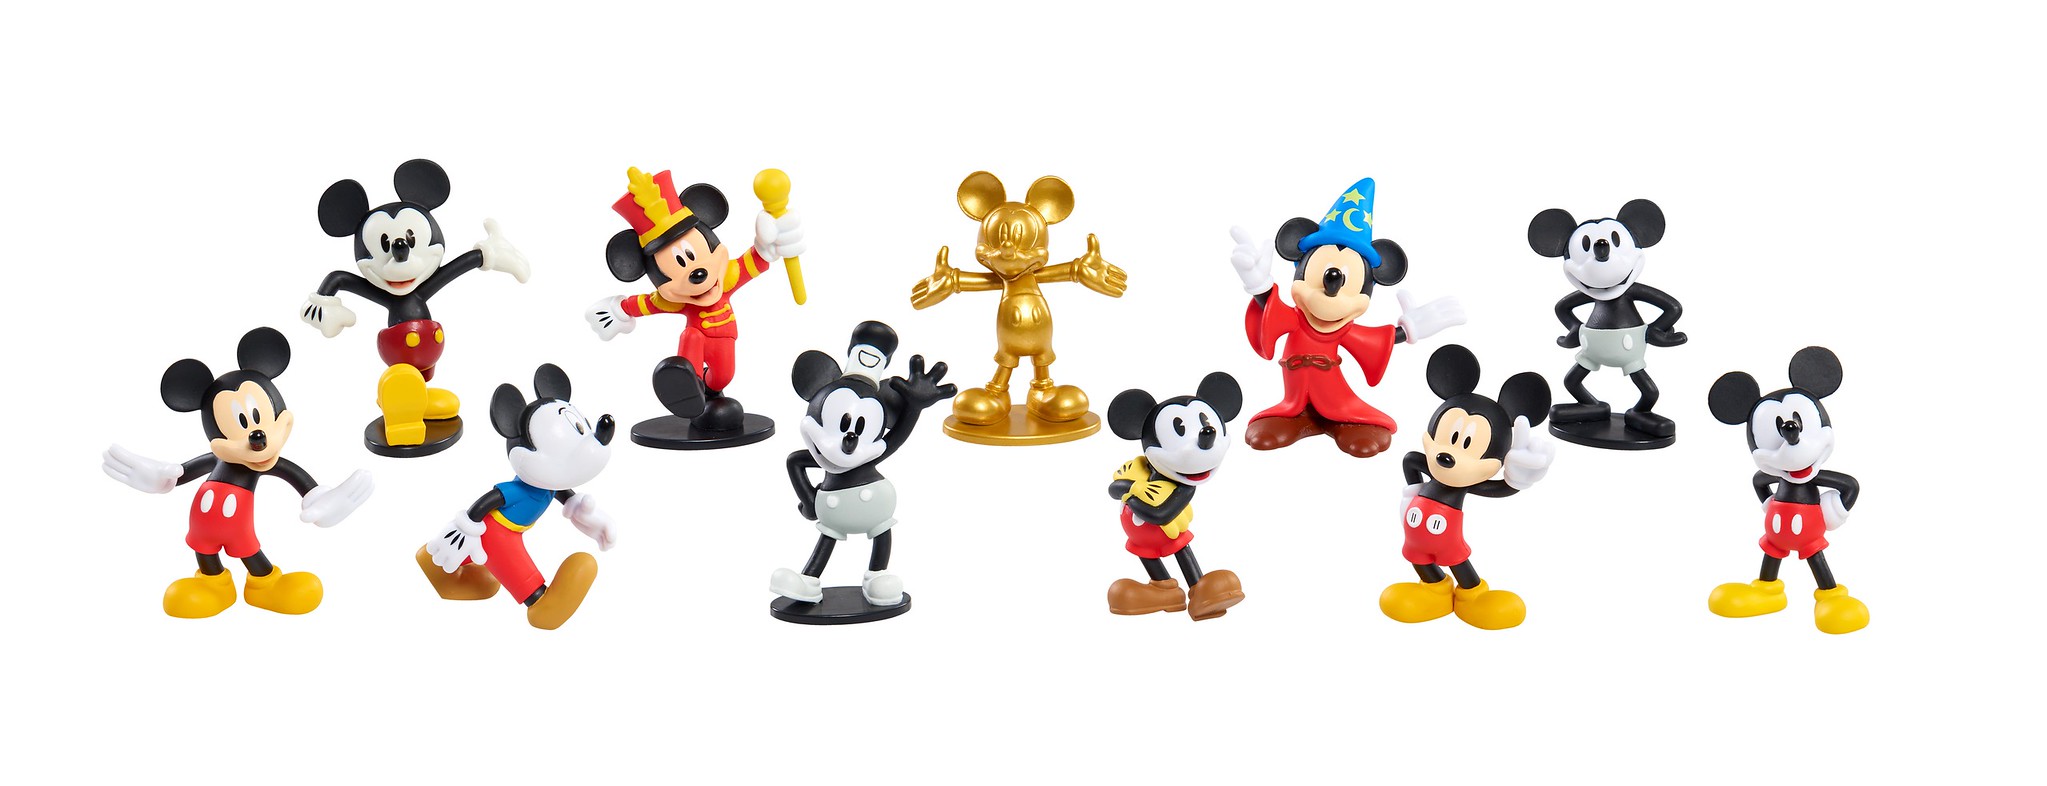 Here is a look at some of the new Mickey Mouse items available. 